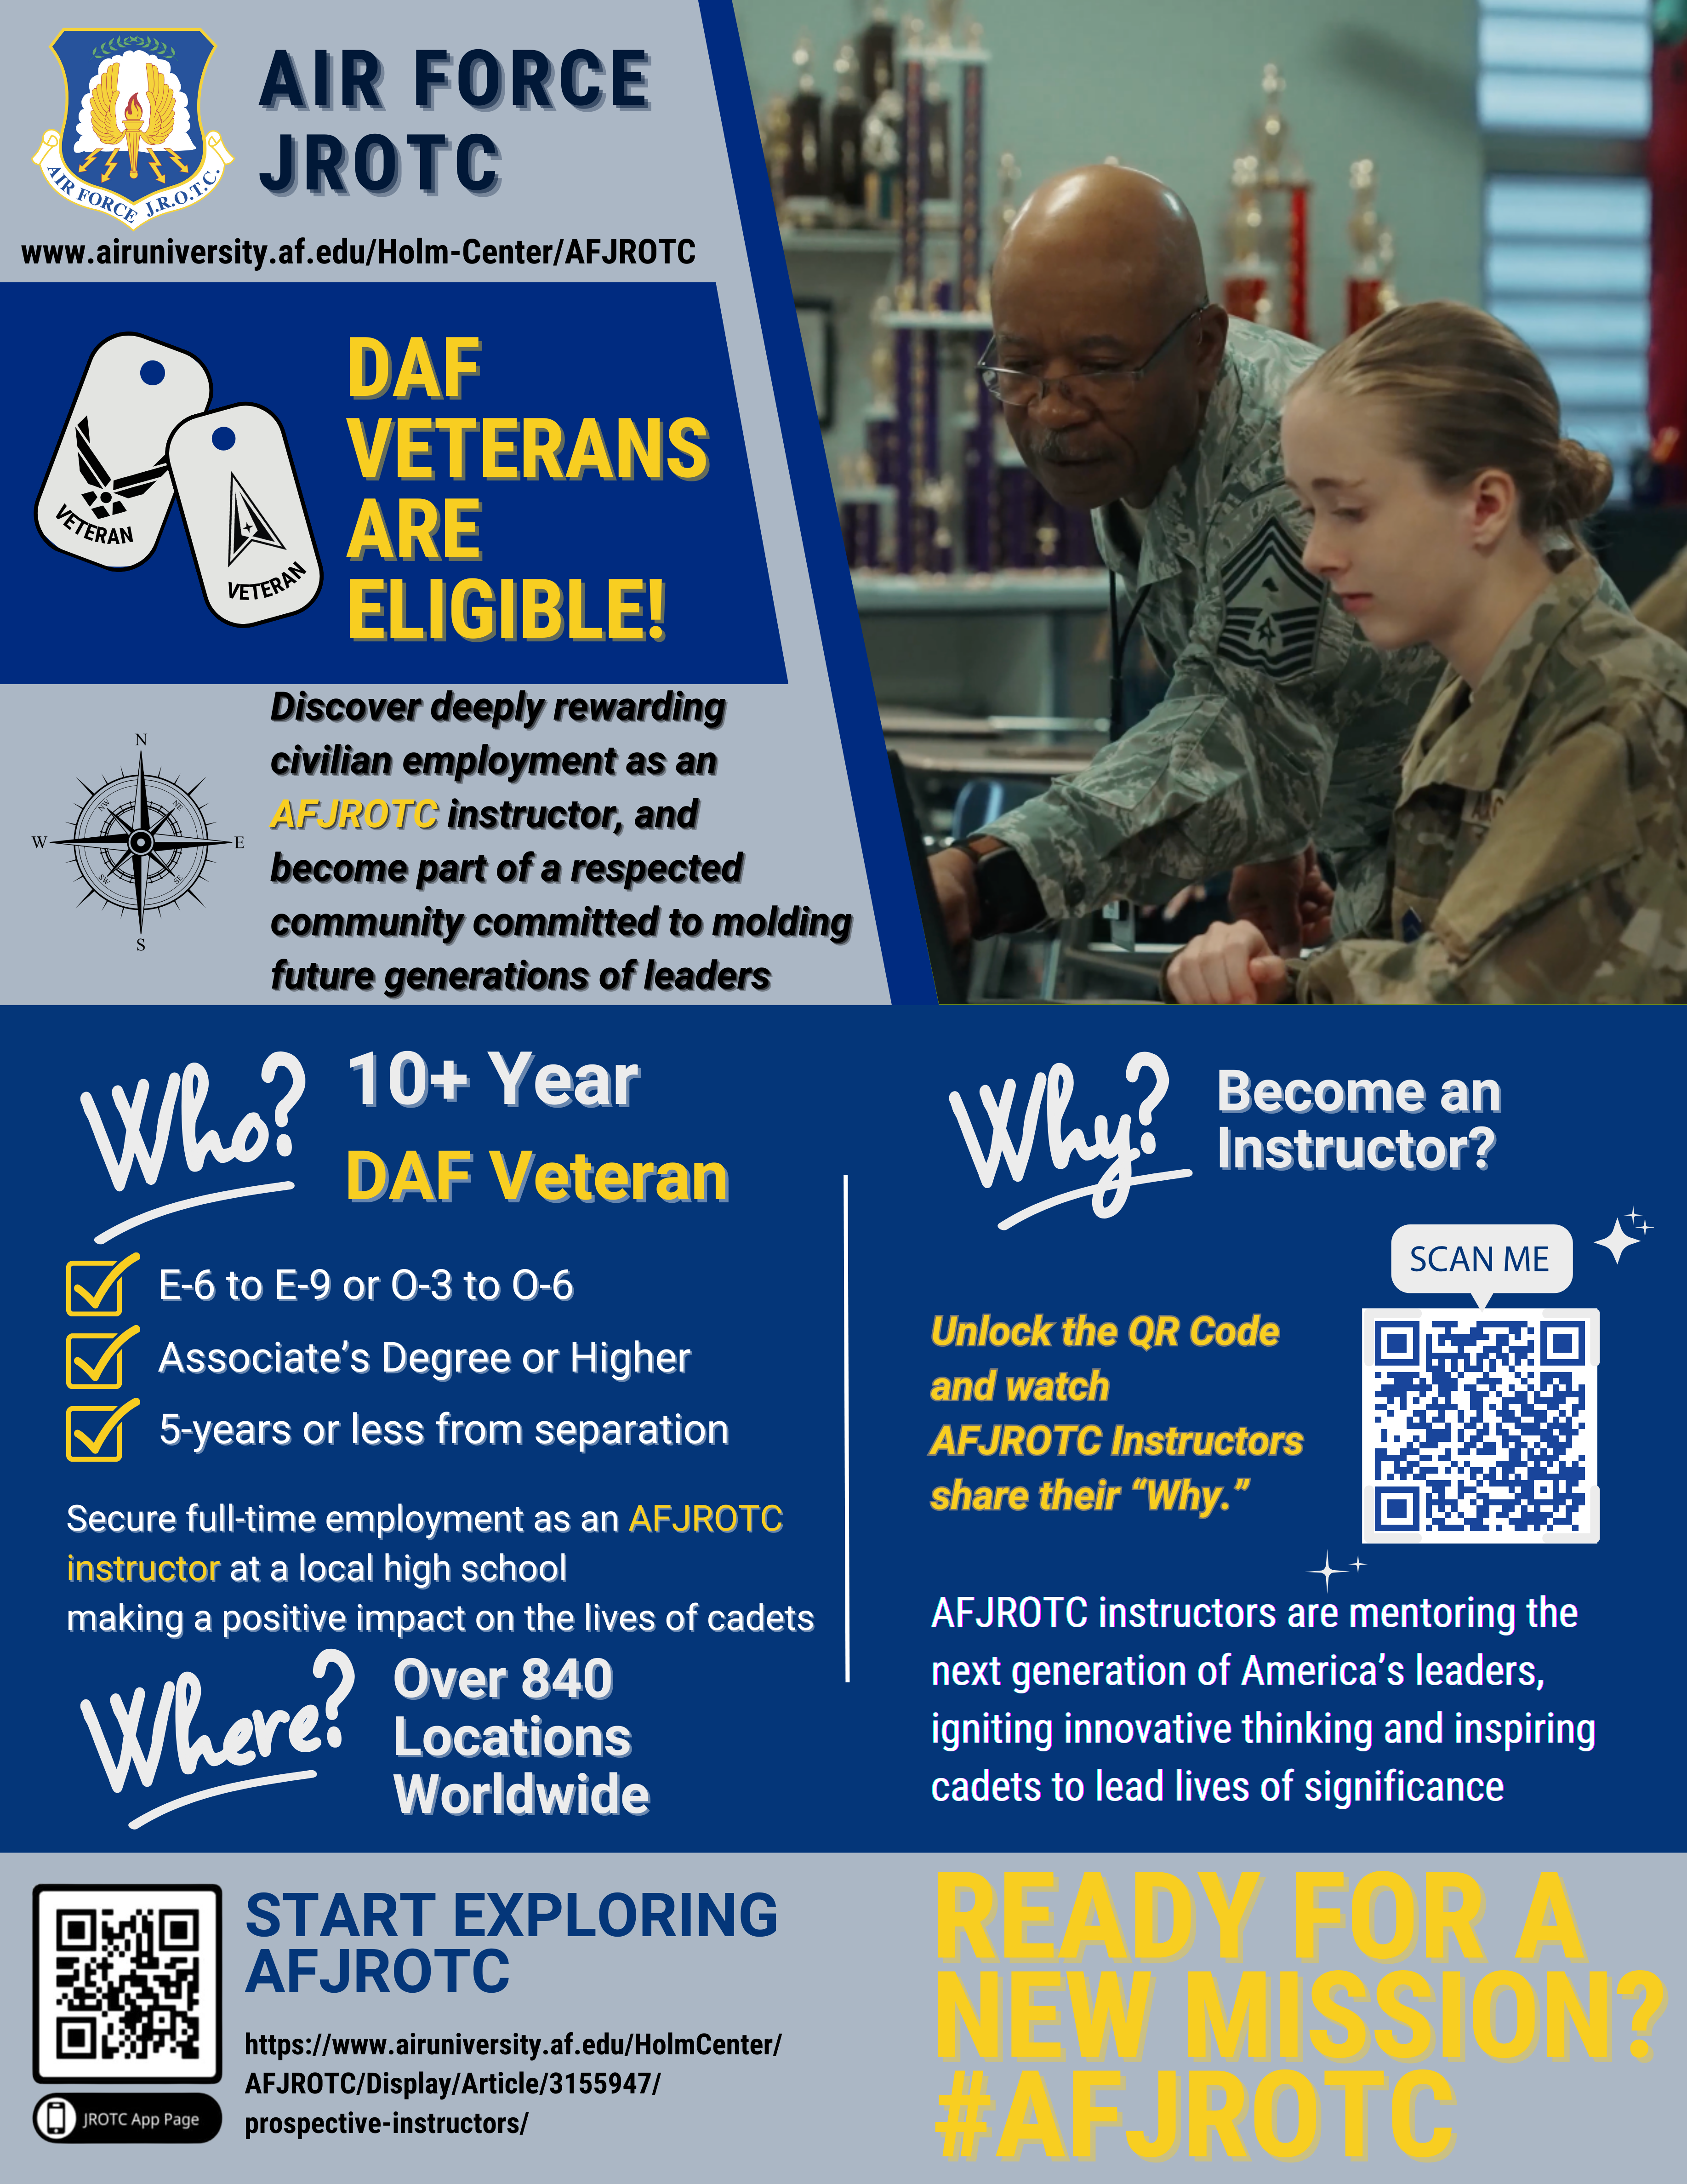 Veterans Now Eligible to Apply for Air Force Junior ROTC Instructor Positions